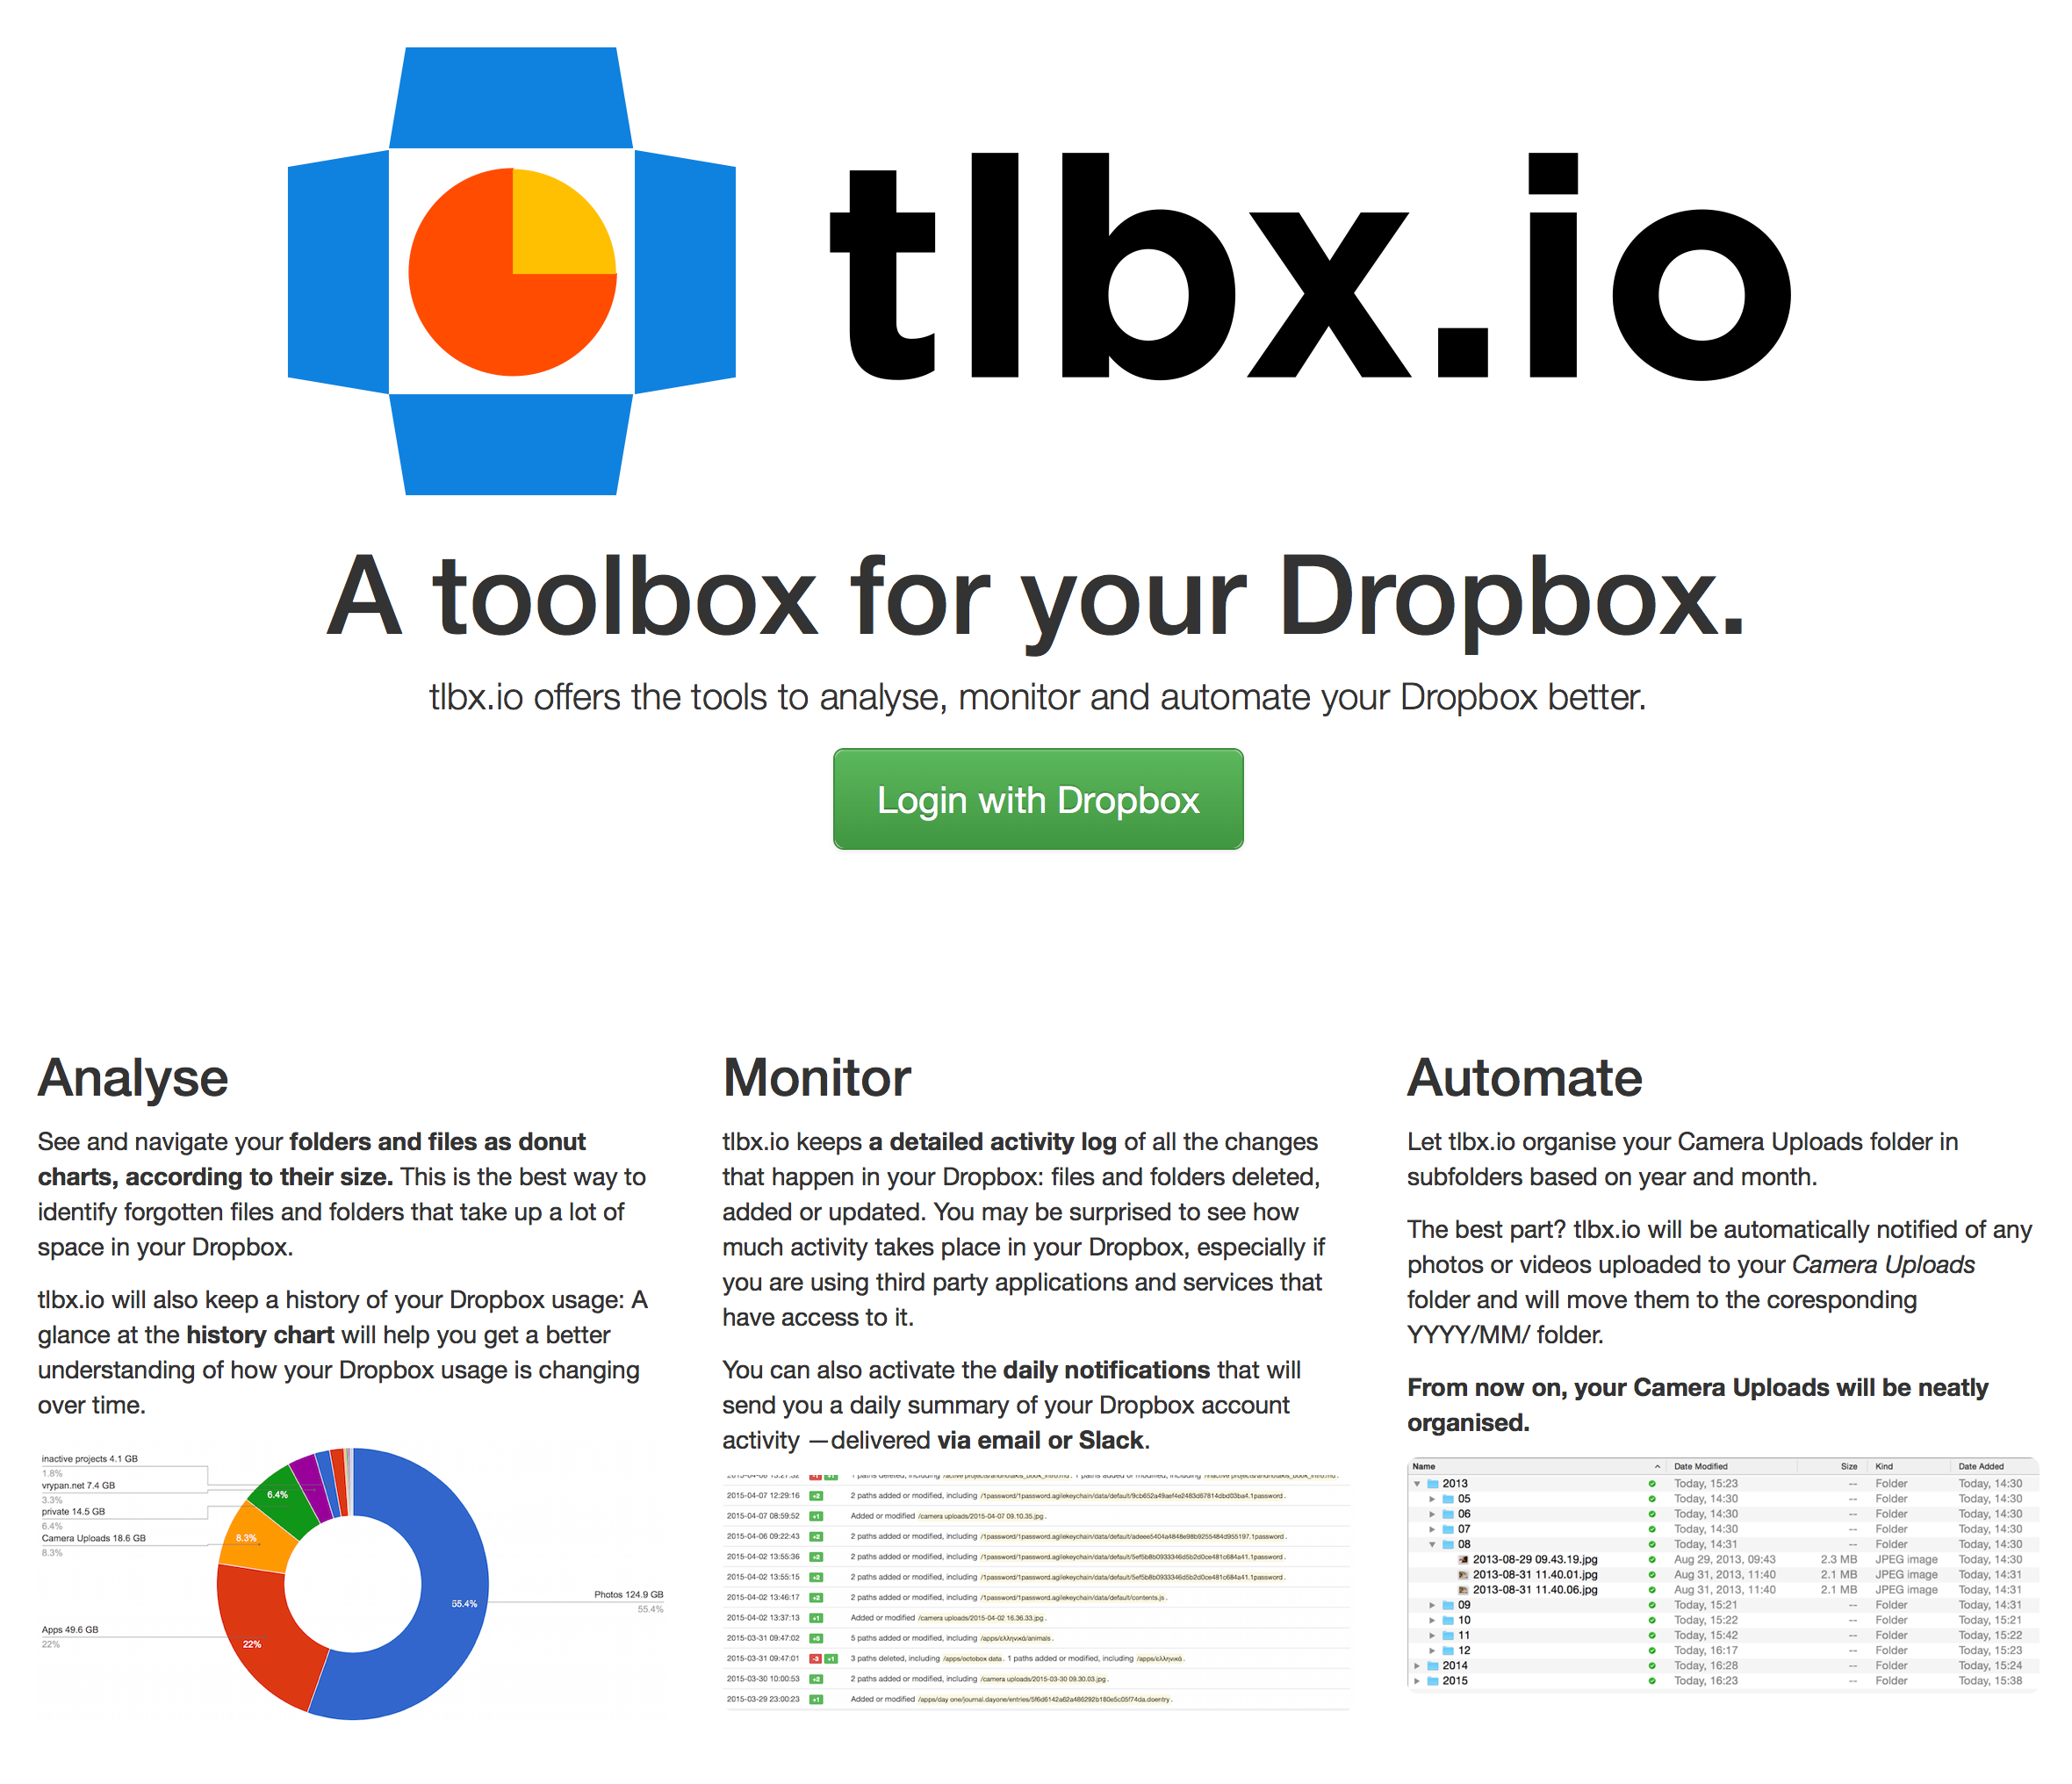 the new tlbx.io